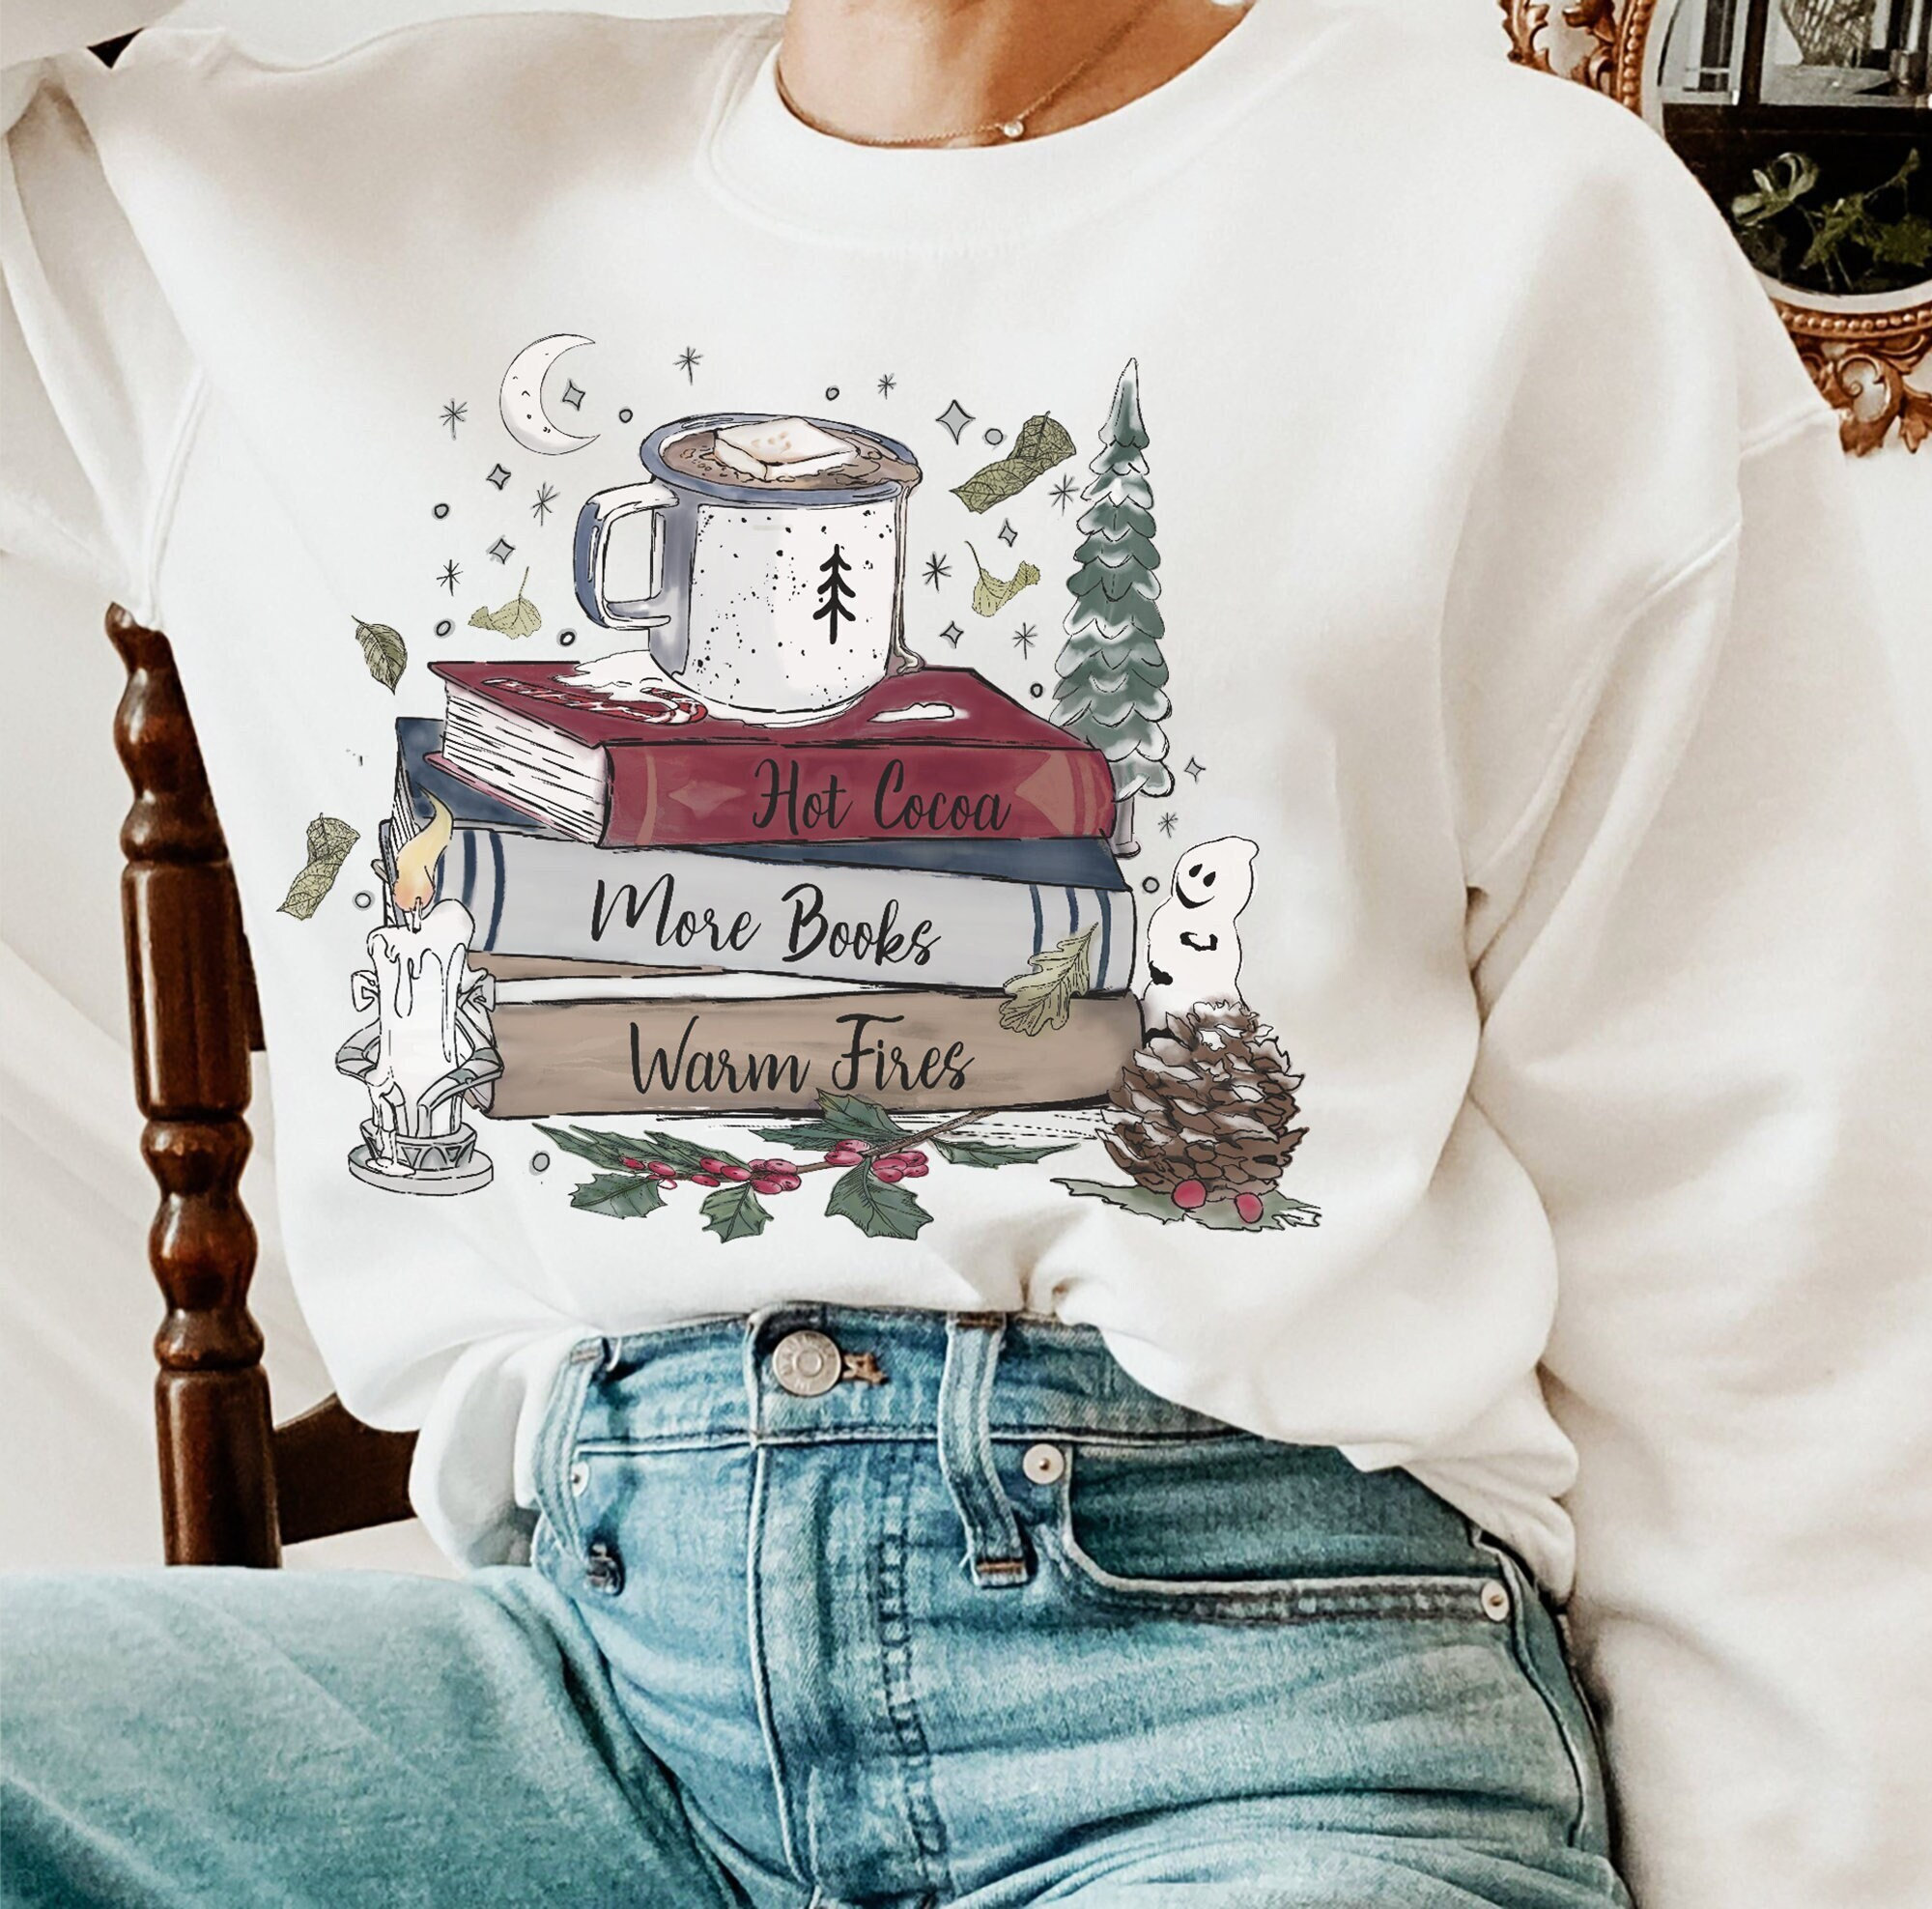 Our Reading Sweater Is Here!